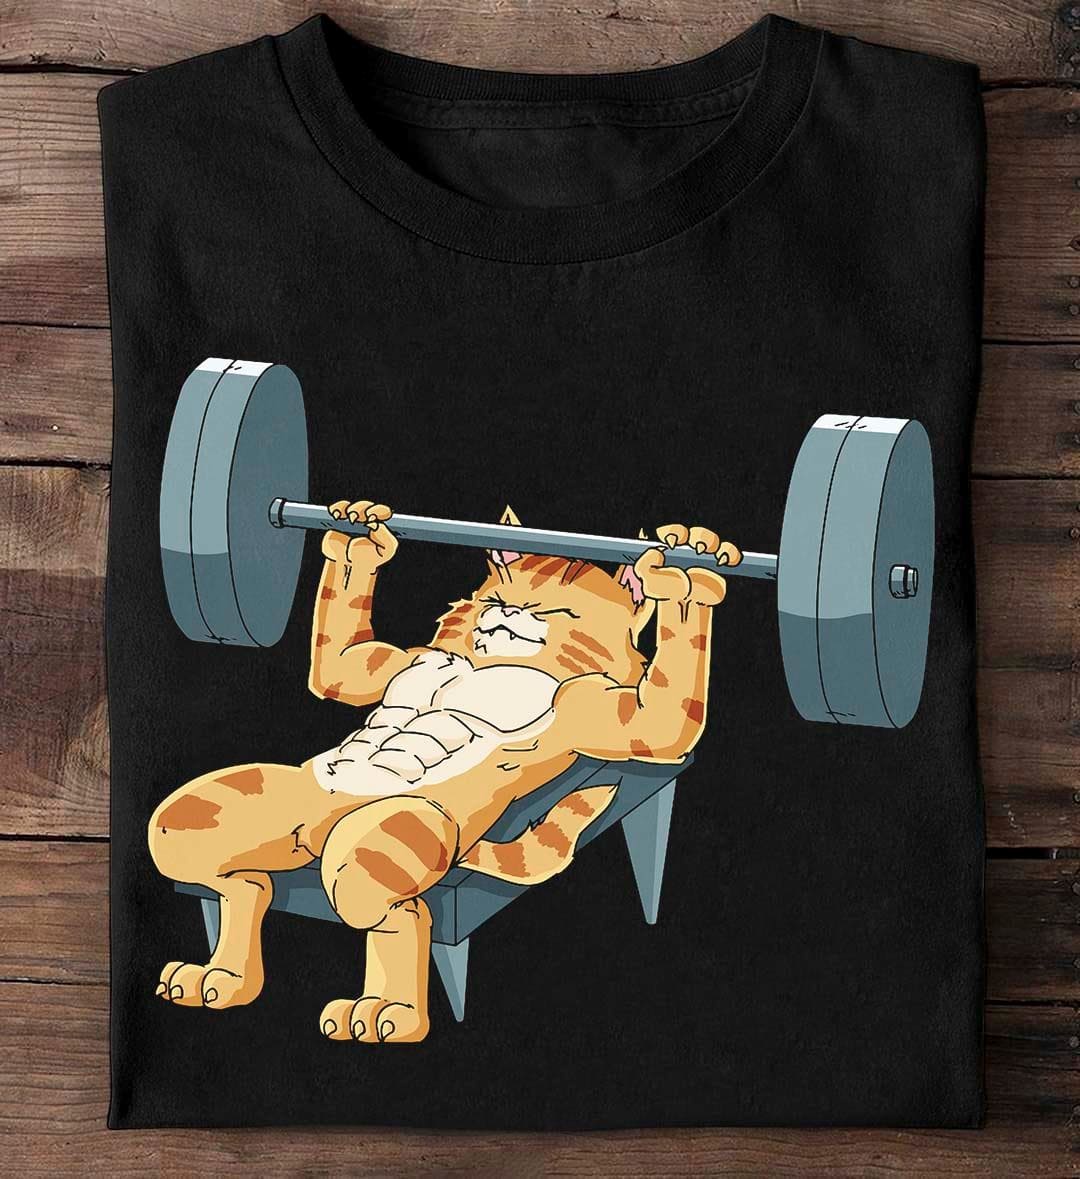 Muscle cat T-shirt - Cat lifting weights, gift for bodybuilder